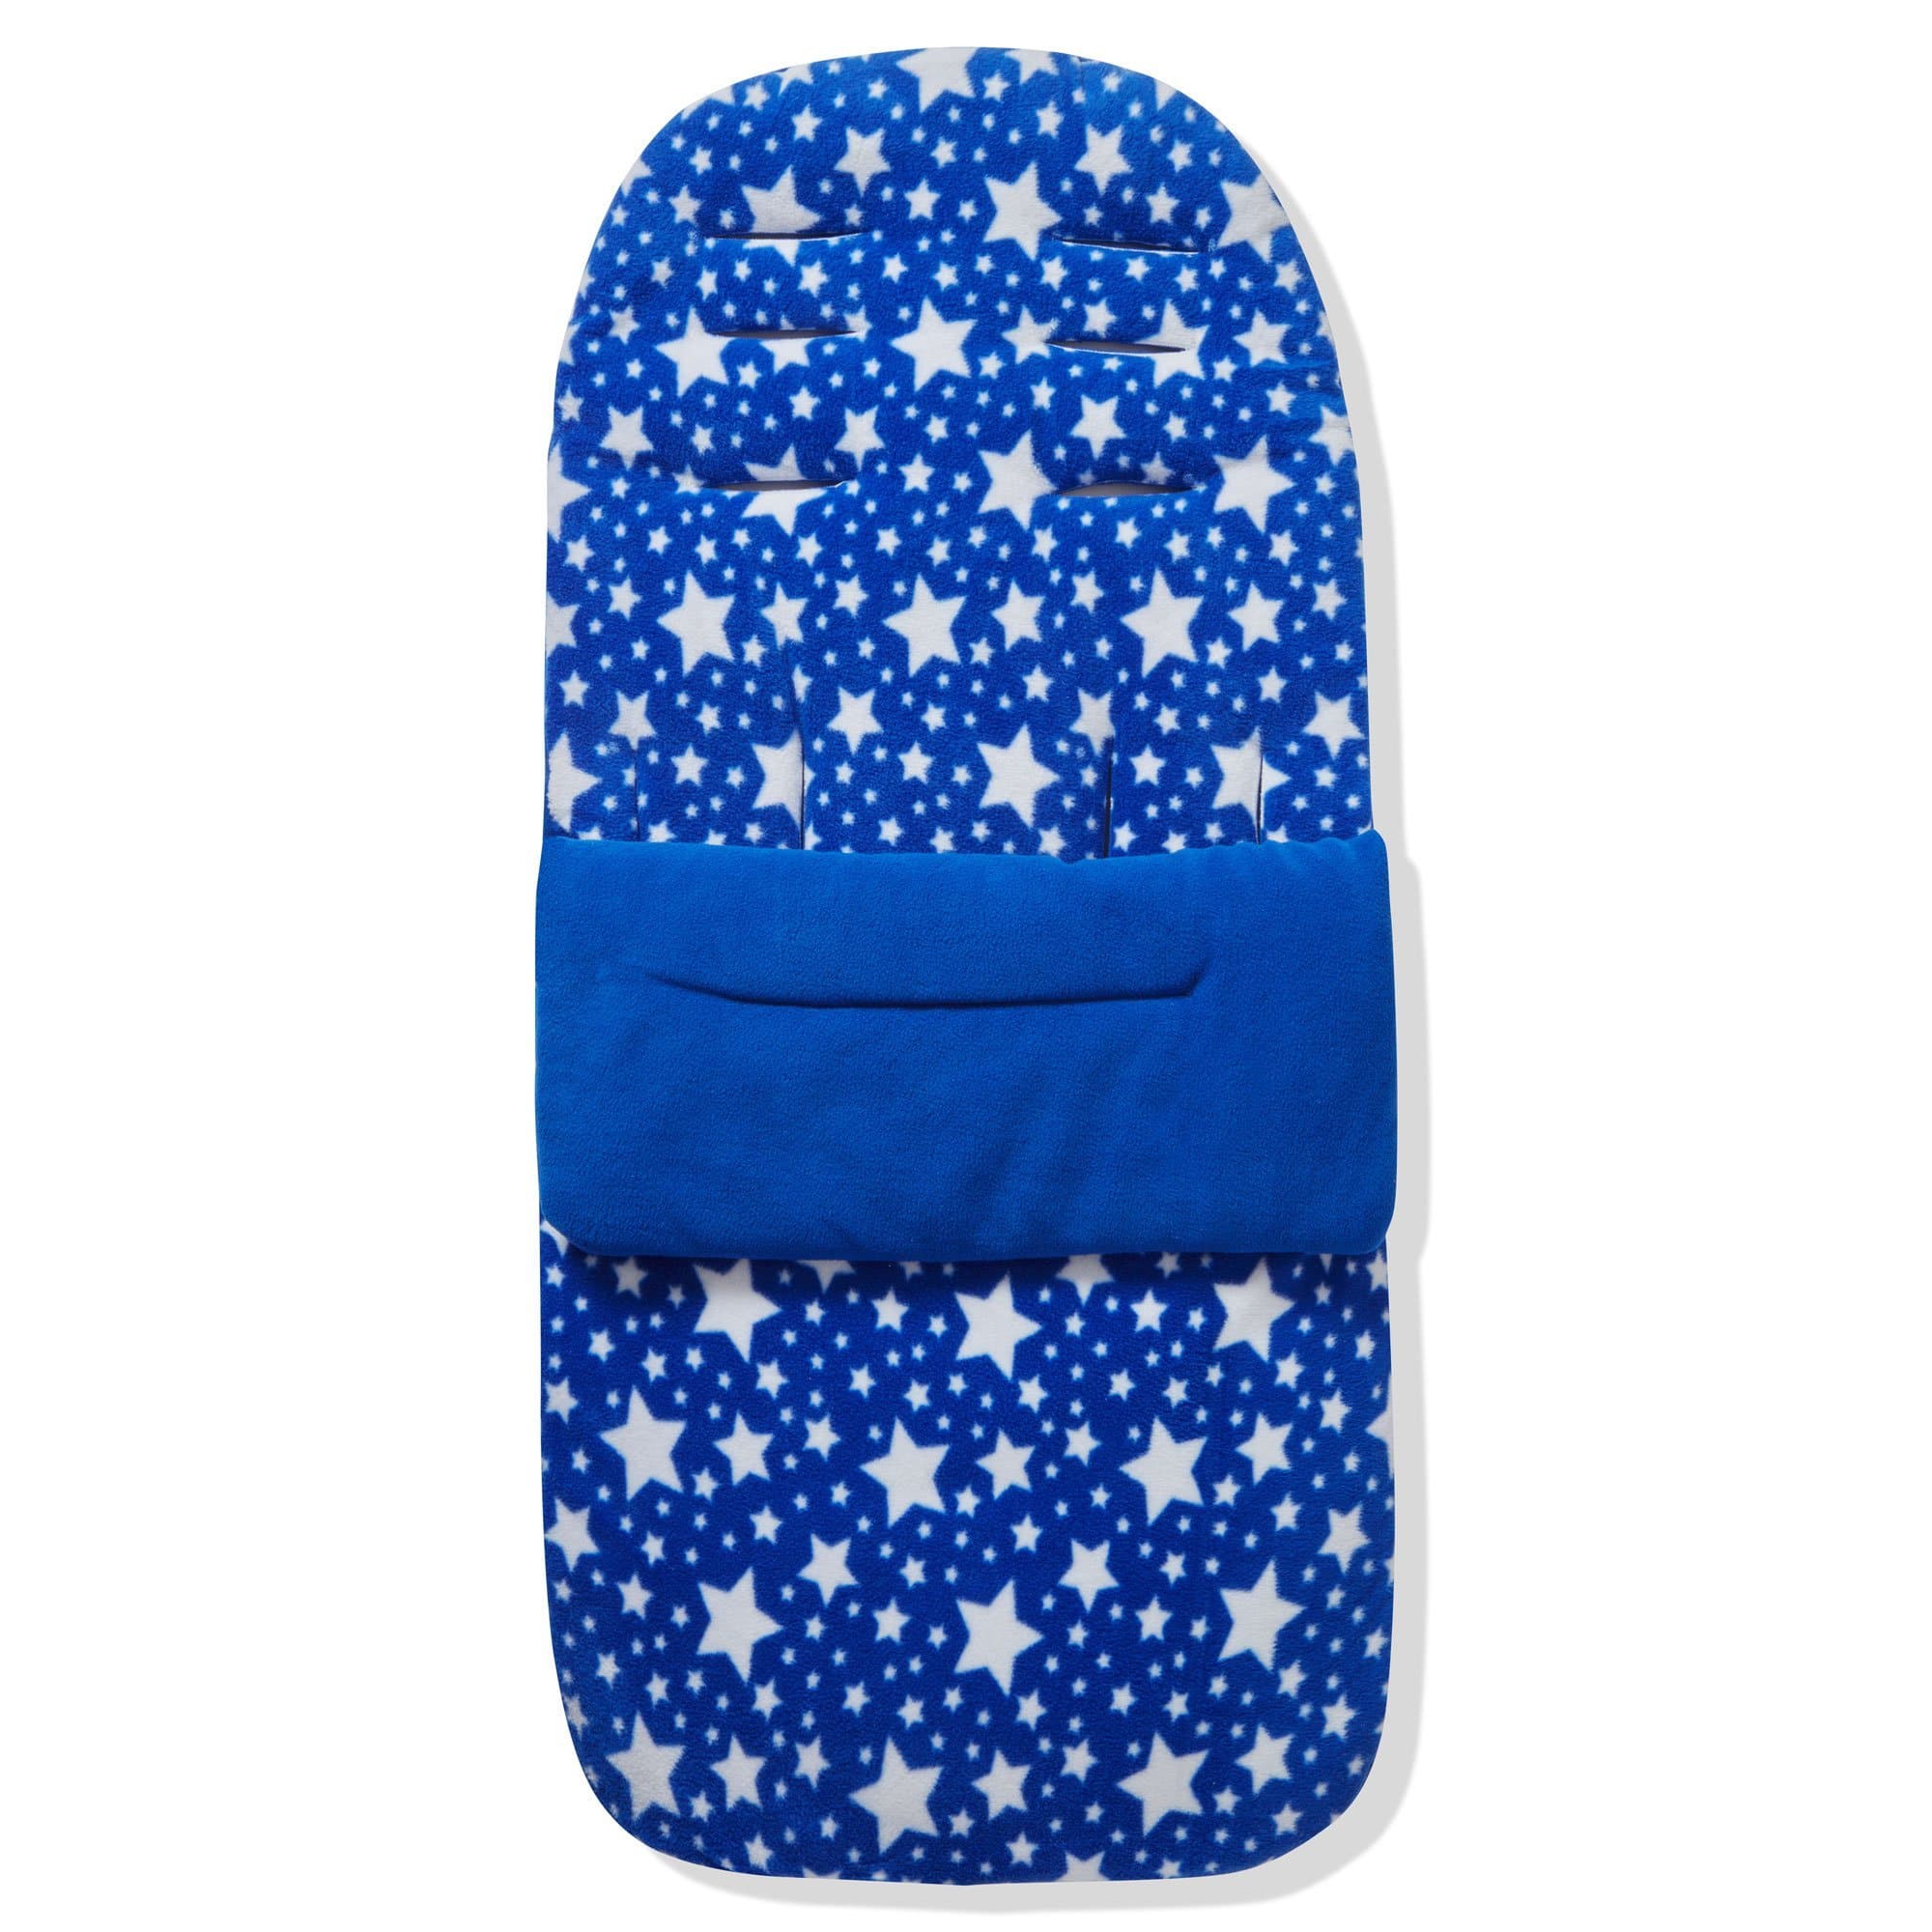 Fleece Footmuff / Cosy Toes Compatible with iCandy - Blue Star / Fits All Models | For Your Little One